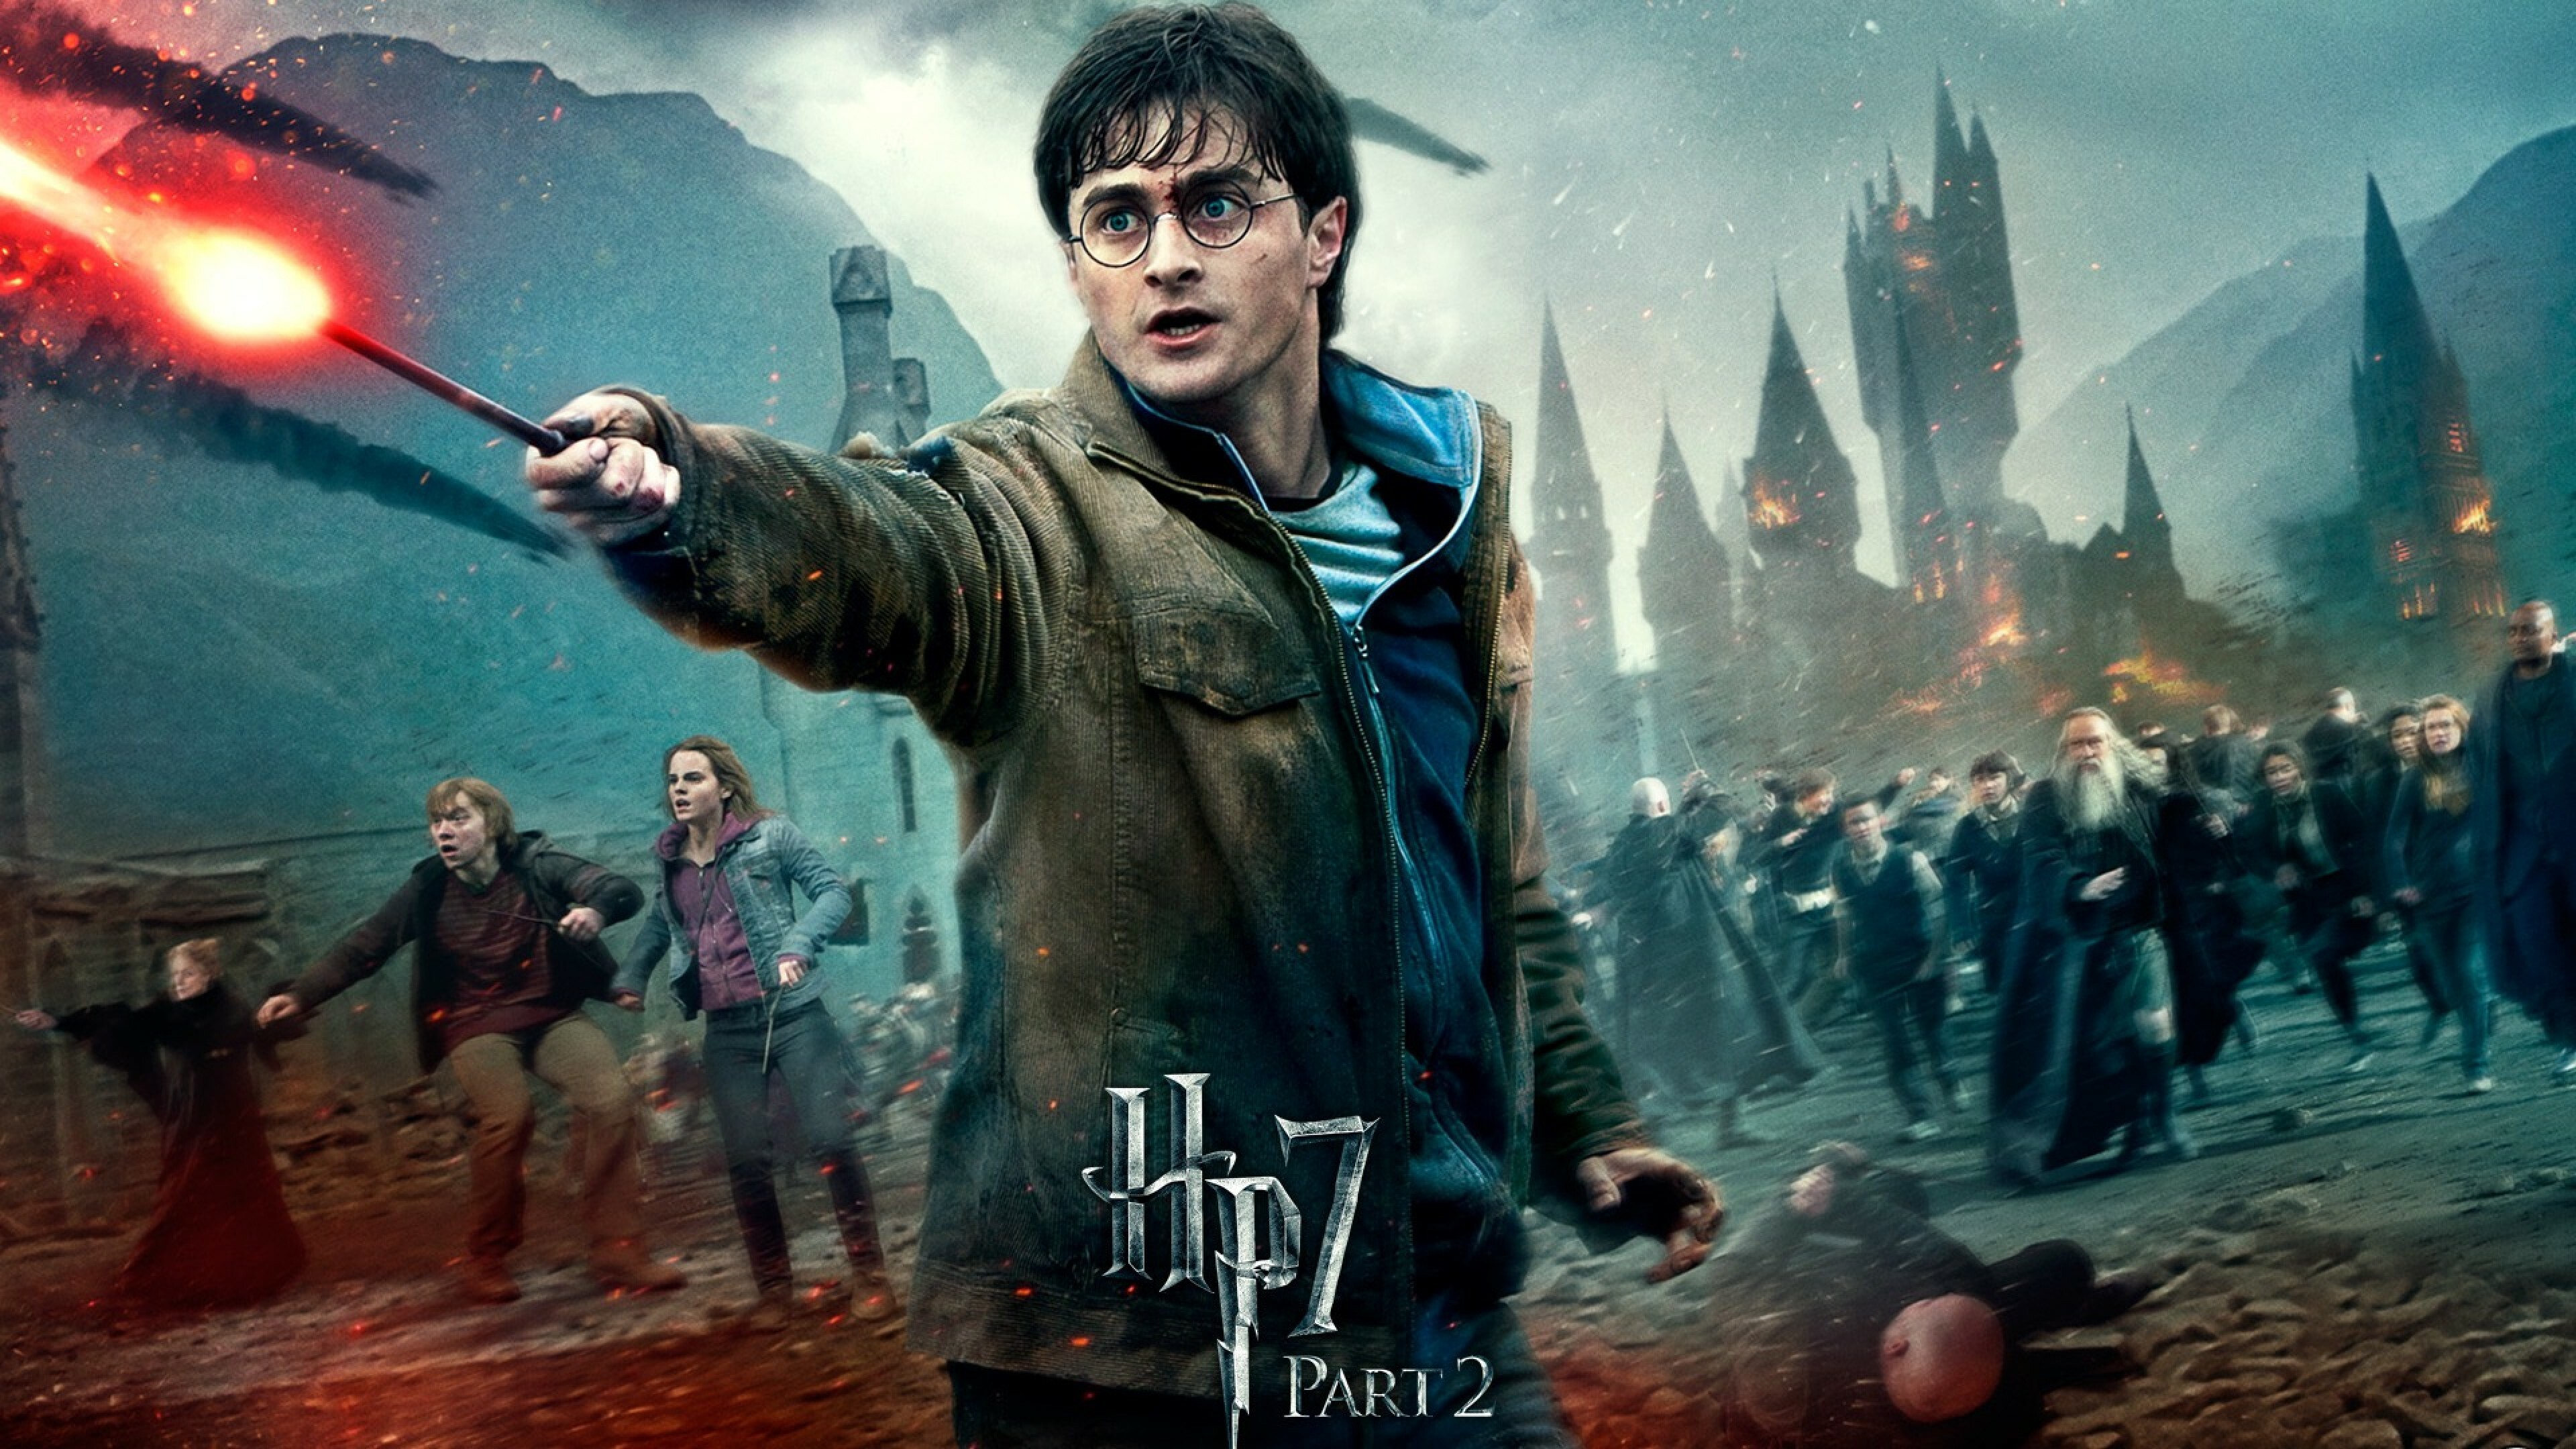 Harry Potter: HP Deathly Hallows, Part 2, A 2011 fantasy film directed by David Yates and distributed by Warner Bros. Pictures. 3840x2160 4K Background.